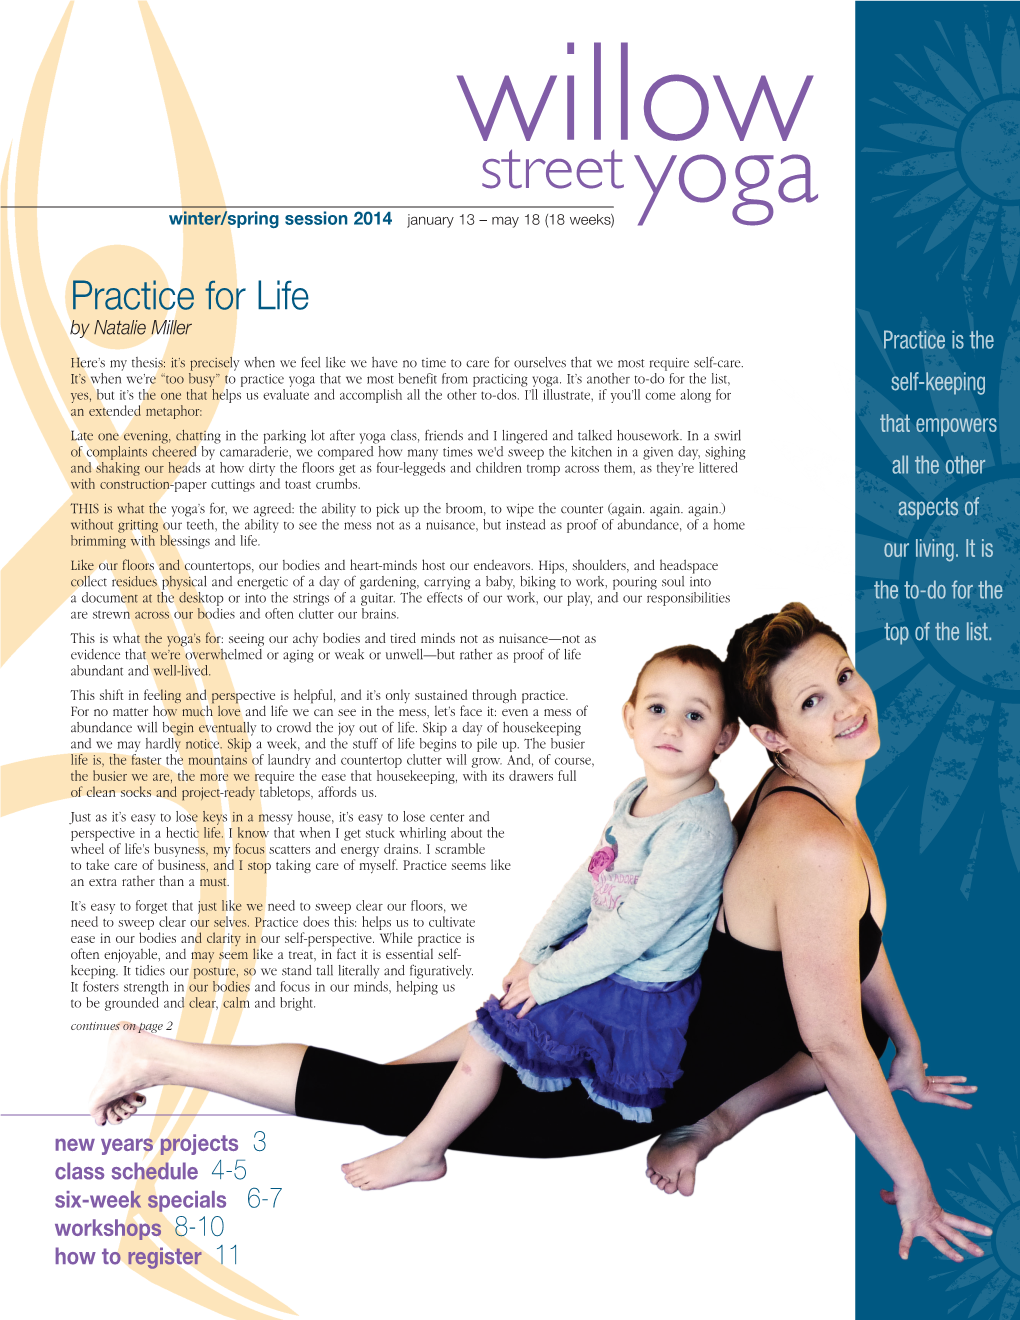 Willow Street Yoga Winter/Spring Session 2014 January 13 – May 18 (18 Weeks)